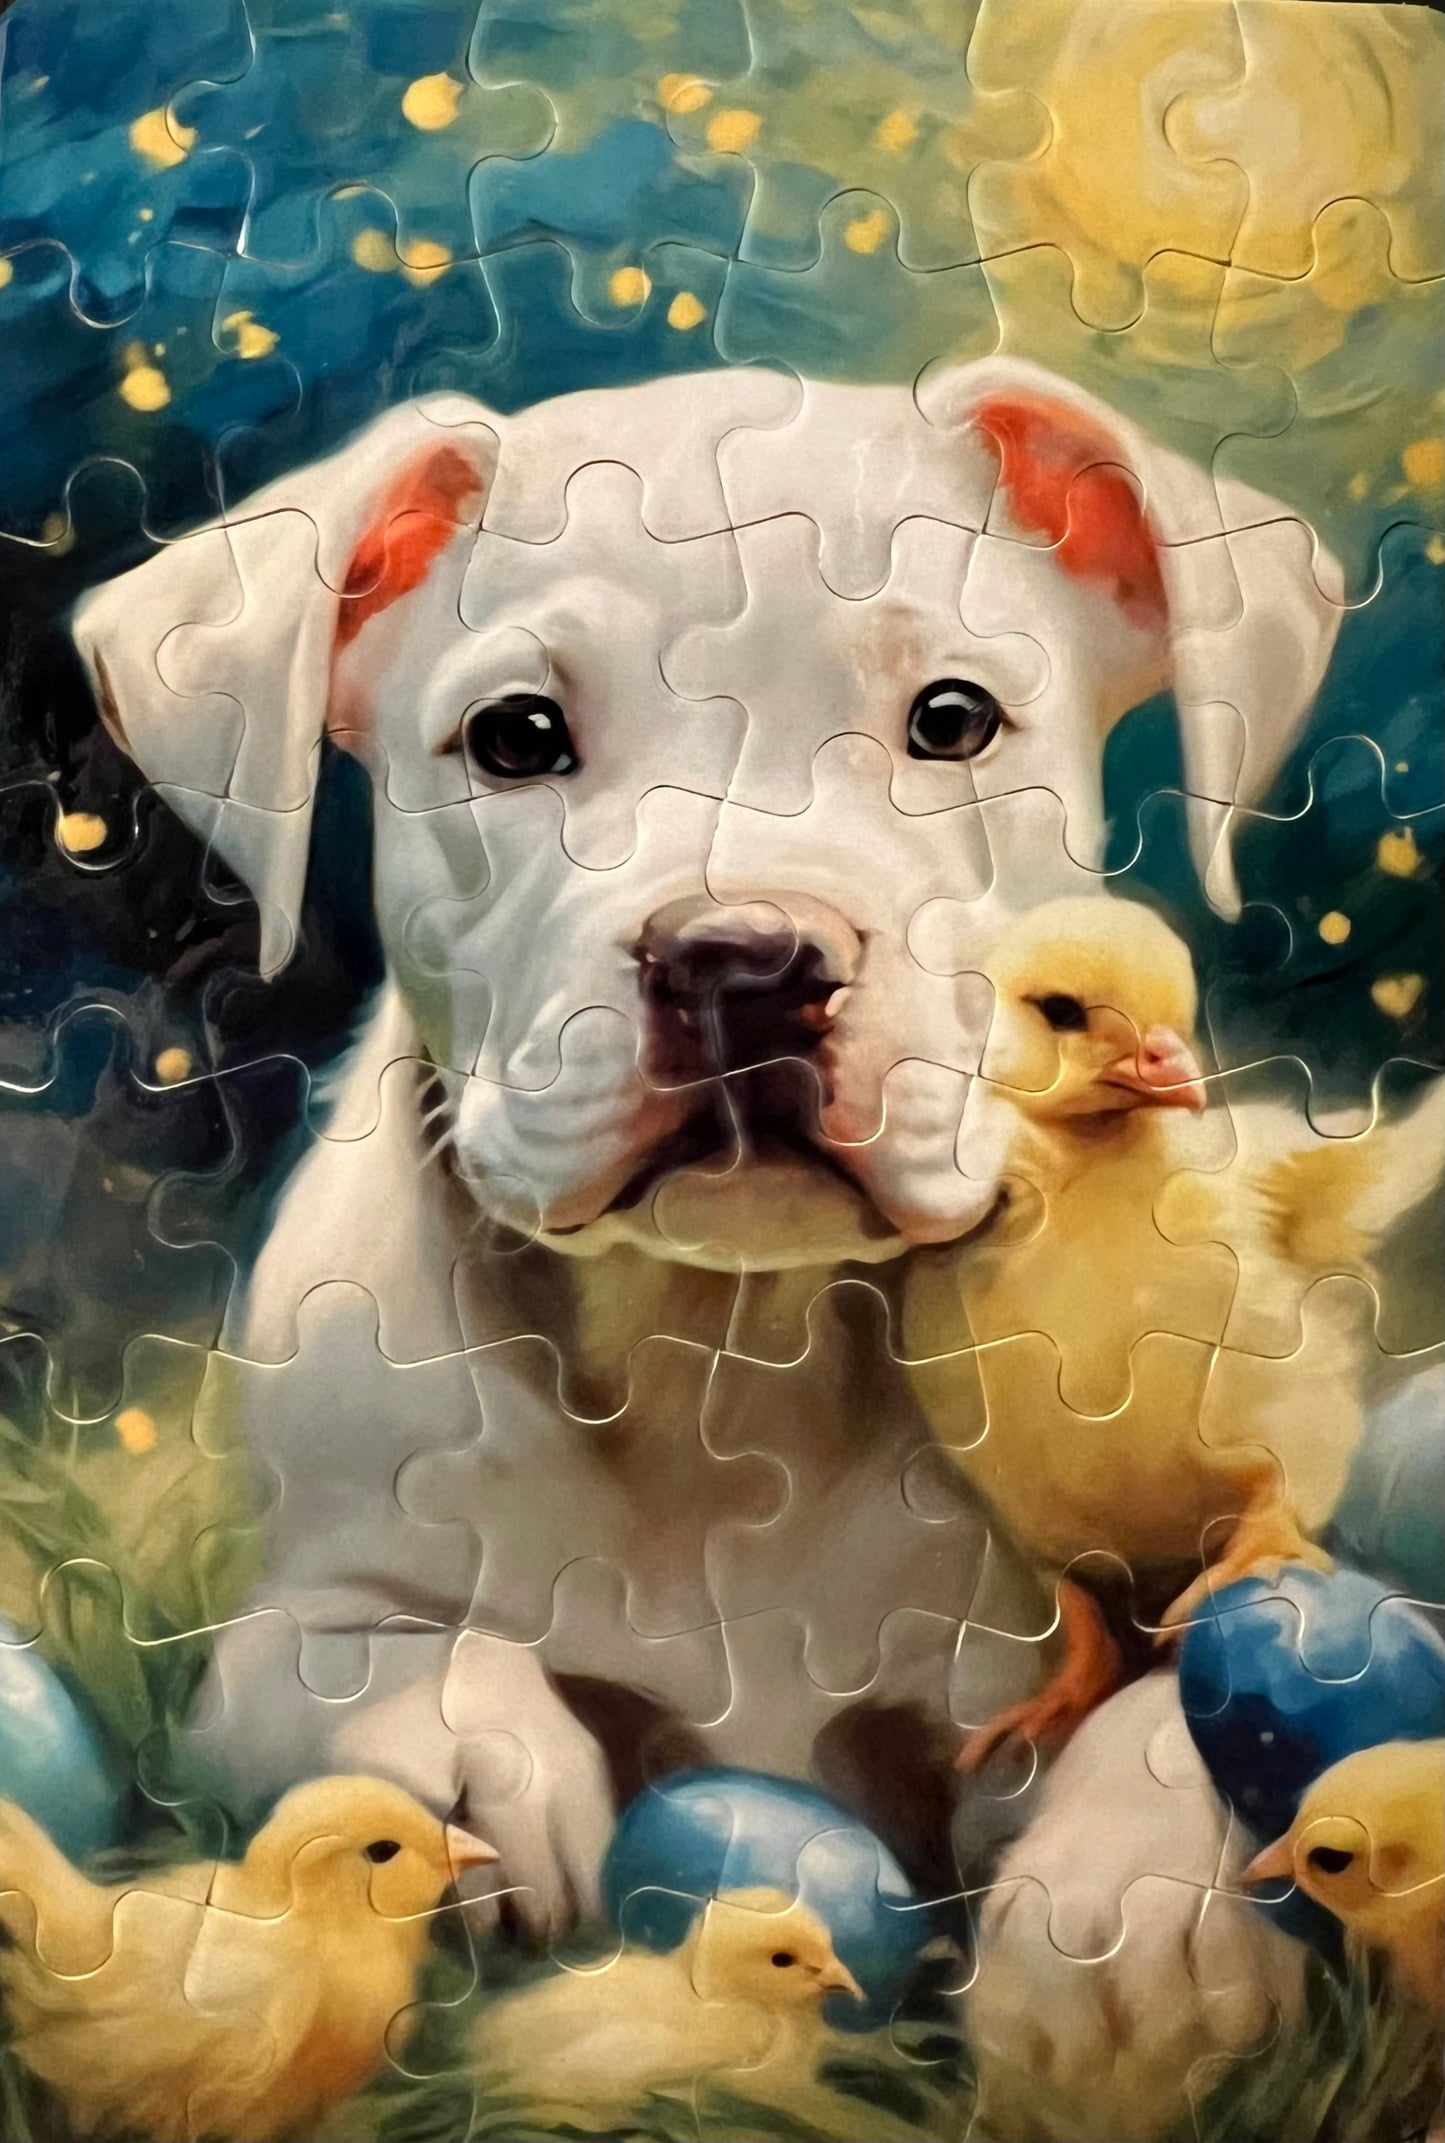 48 Piece A5 Handcrafted puzzle - An Easter puzzle